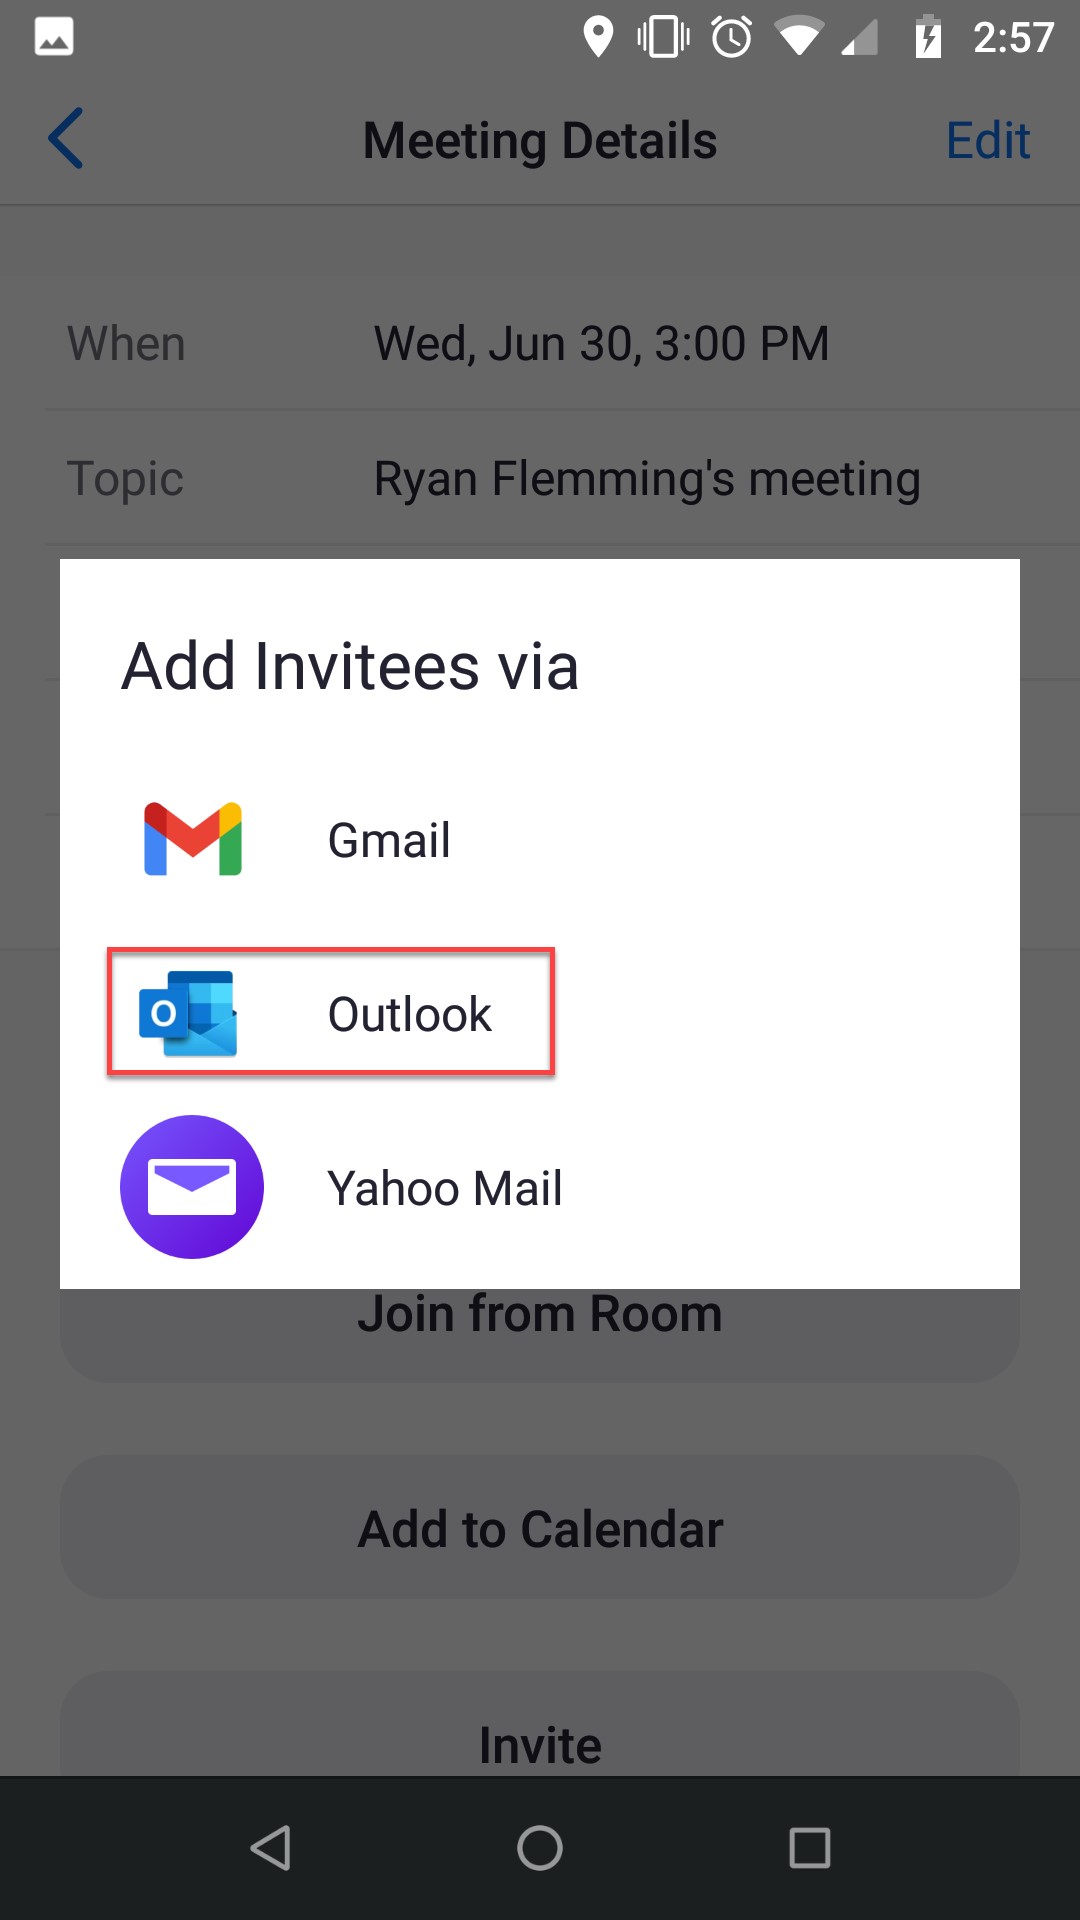 Add attendees via Gmail, Outlook, Yahoo Mail window.